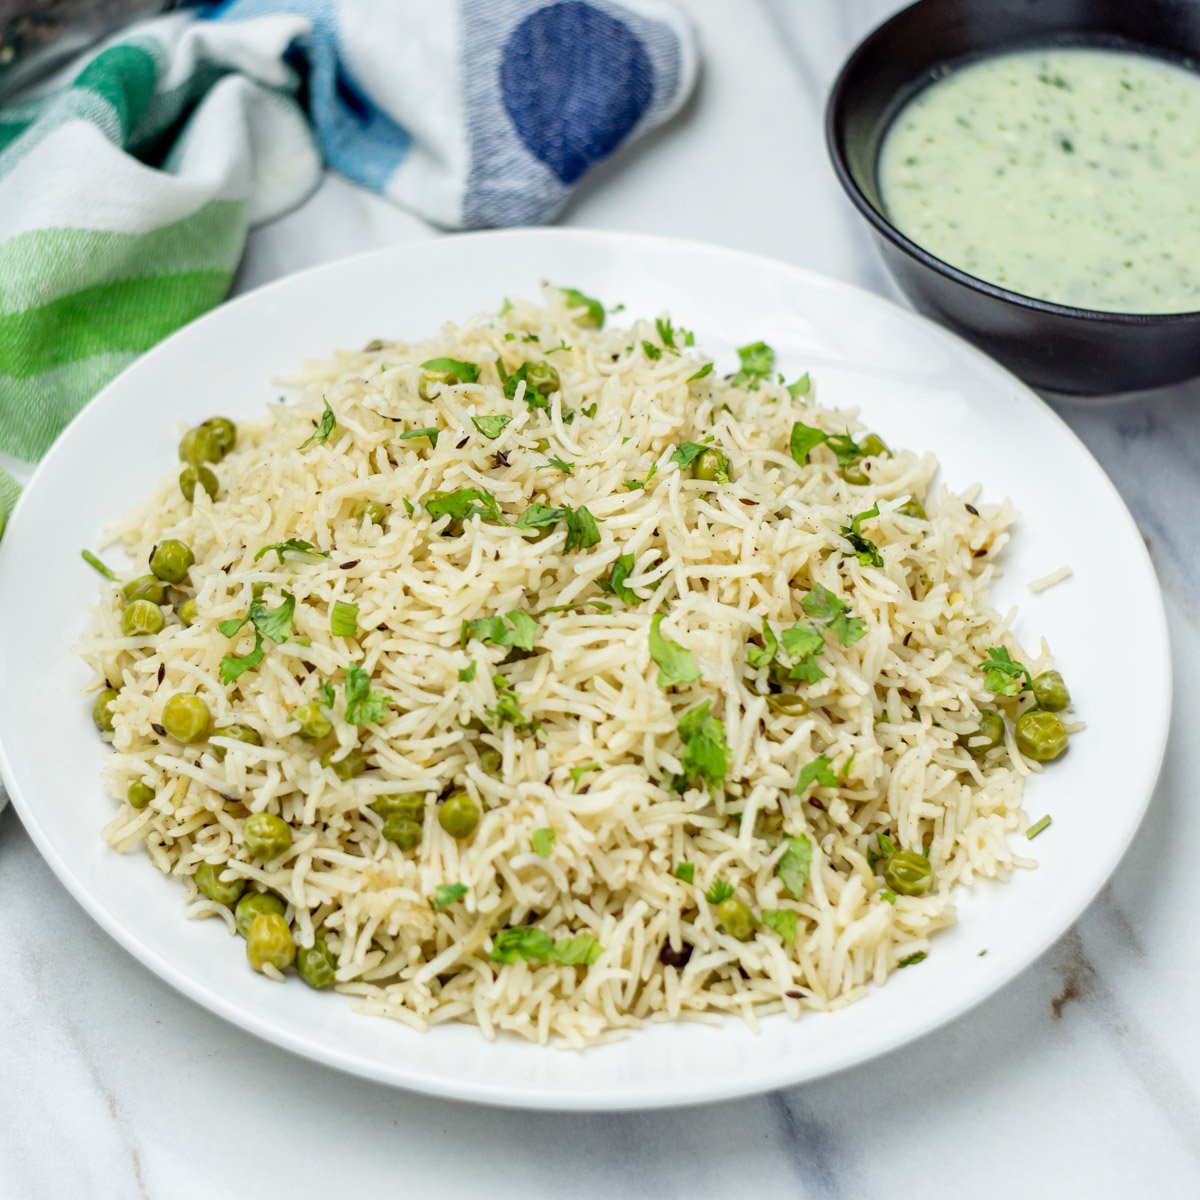 A flavorful and fragrant rice dish filled with green peas, and whole spices, and topped with chopped cilantro.